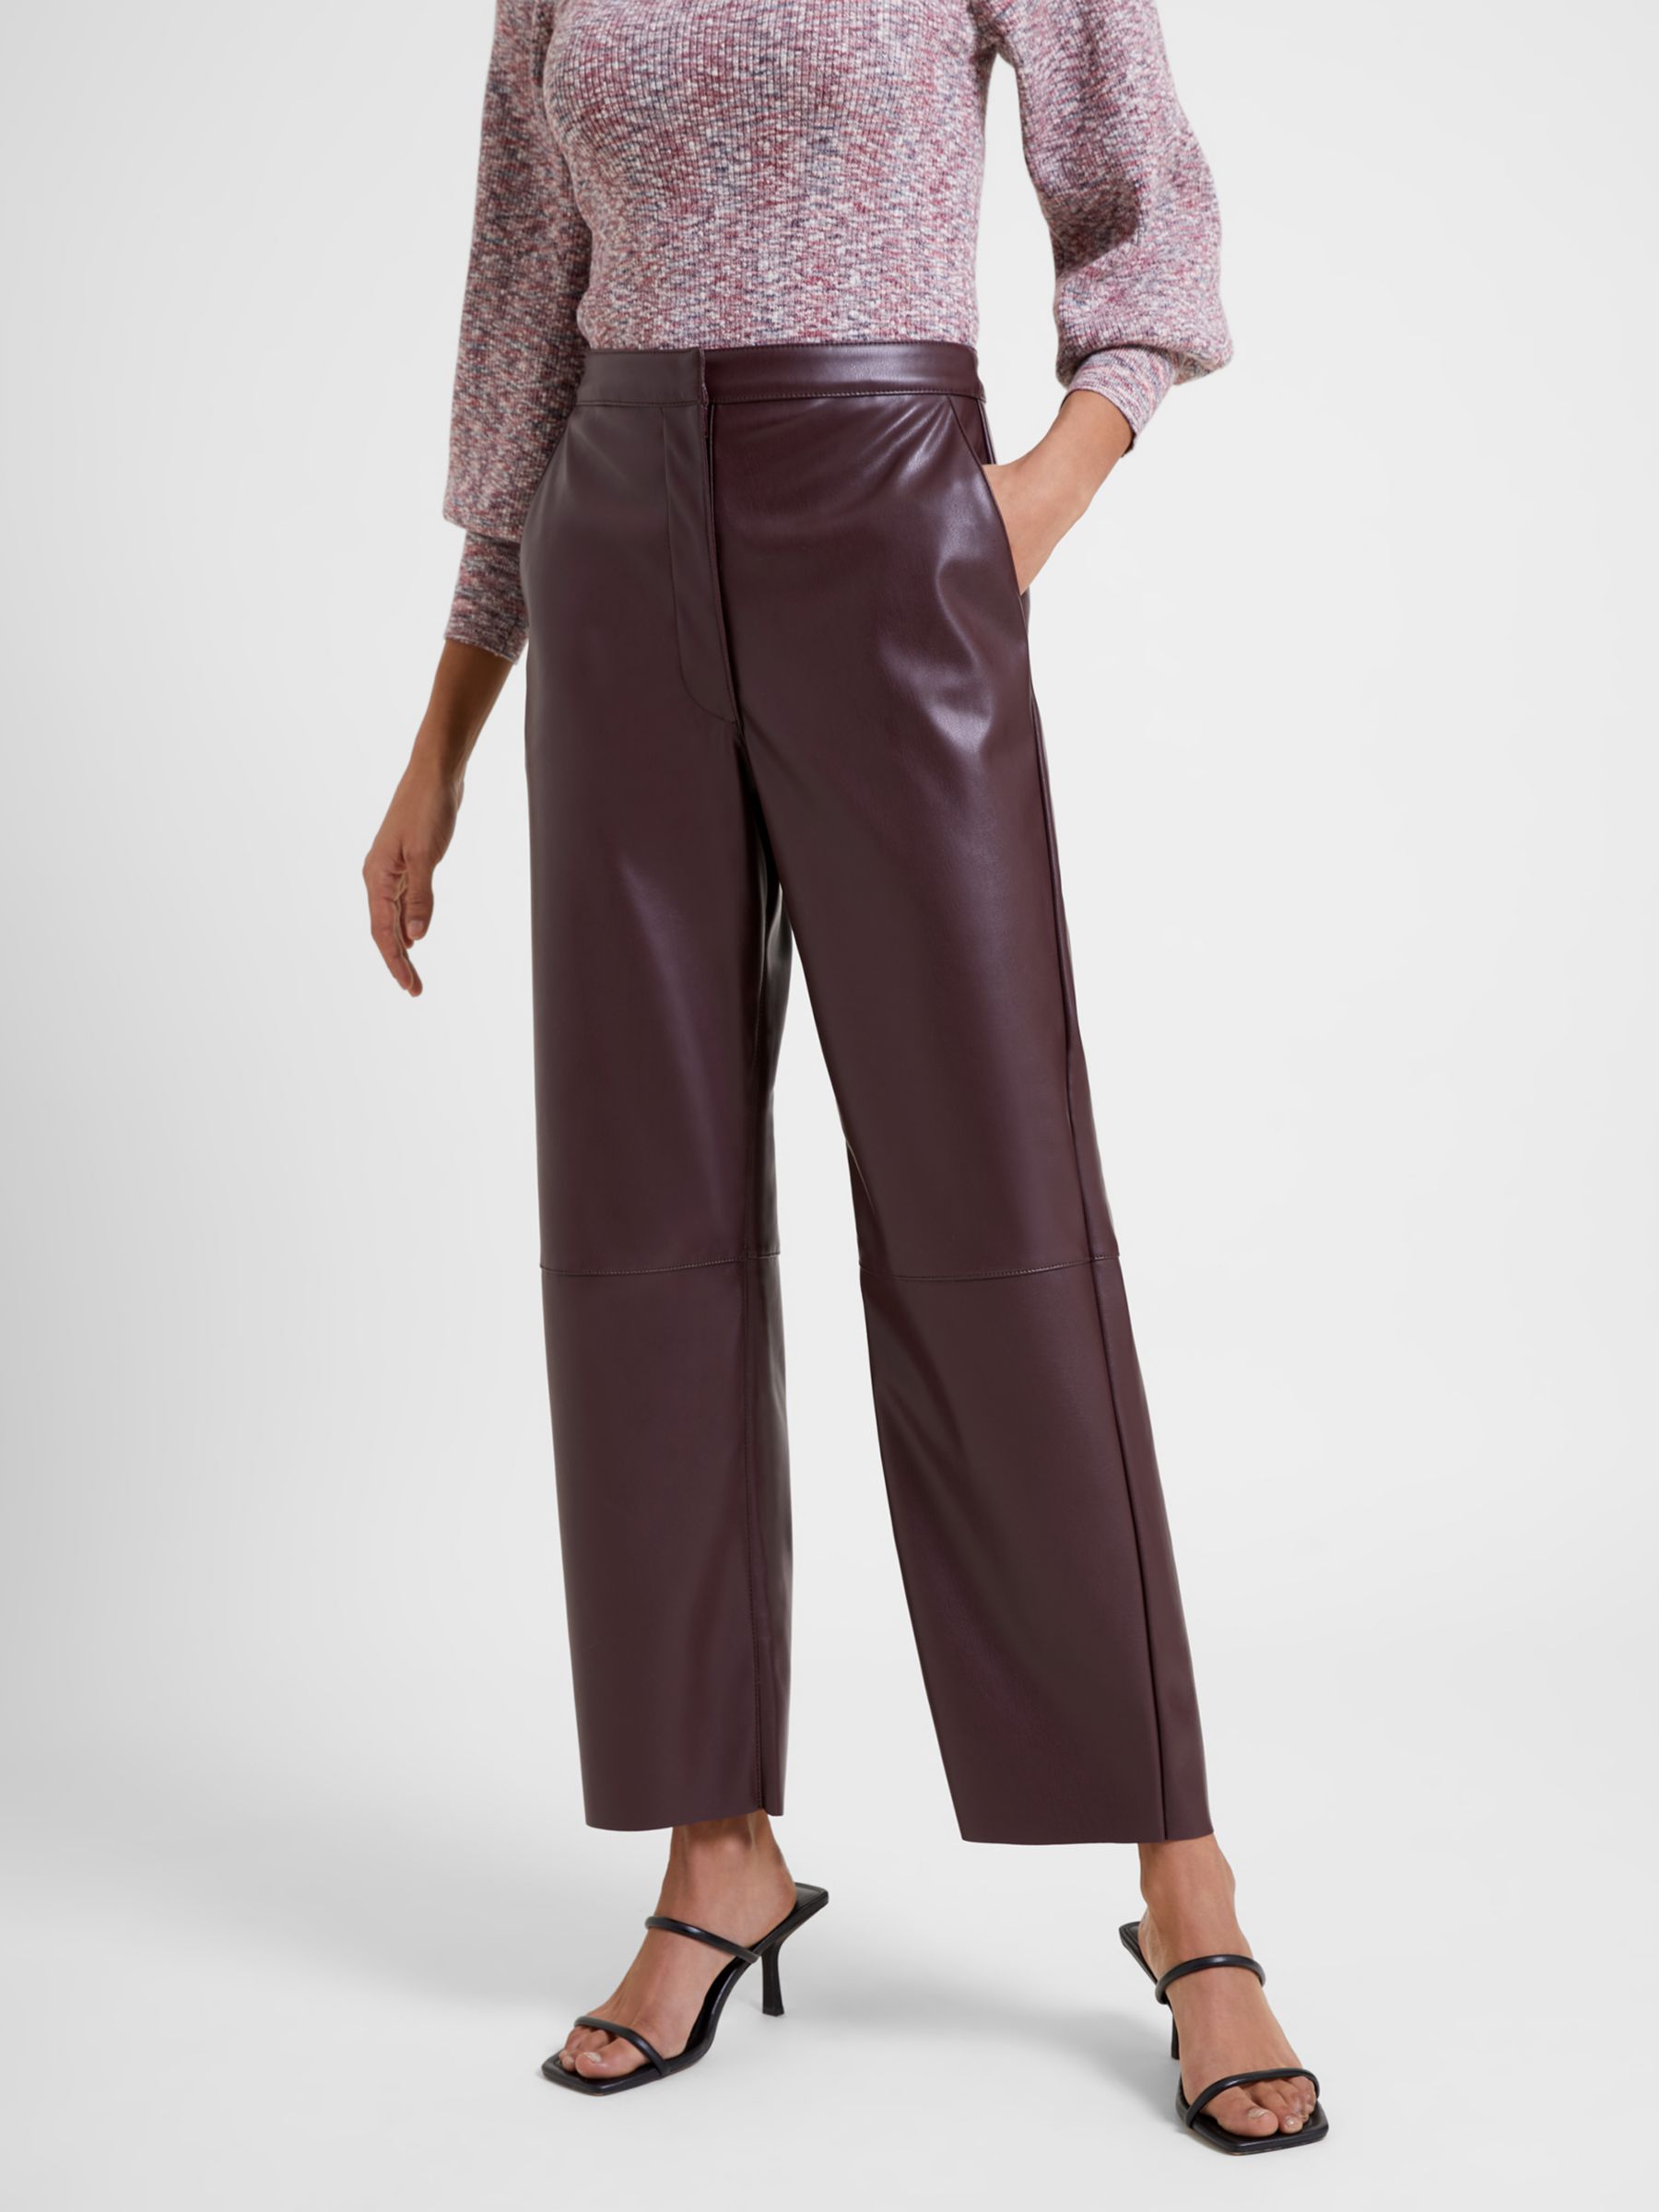 Evanthe Trousers - High Waisted Front Split Faux Leather Trousers in Beige